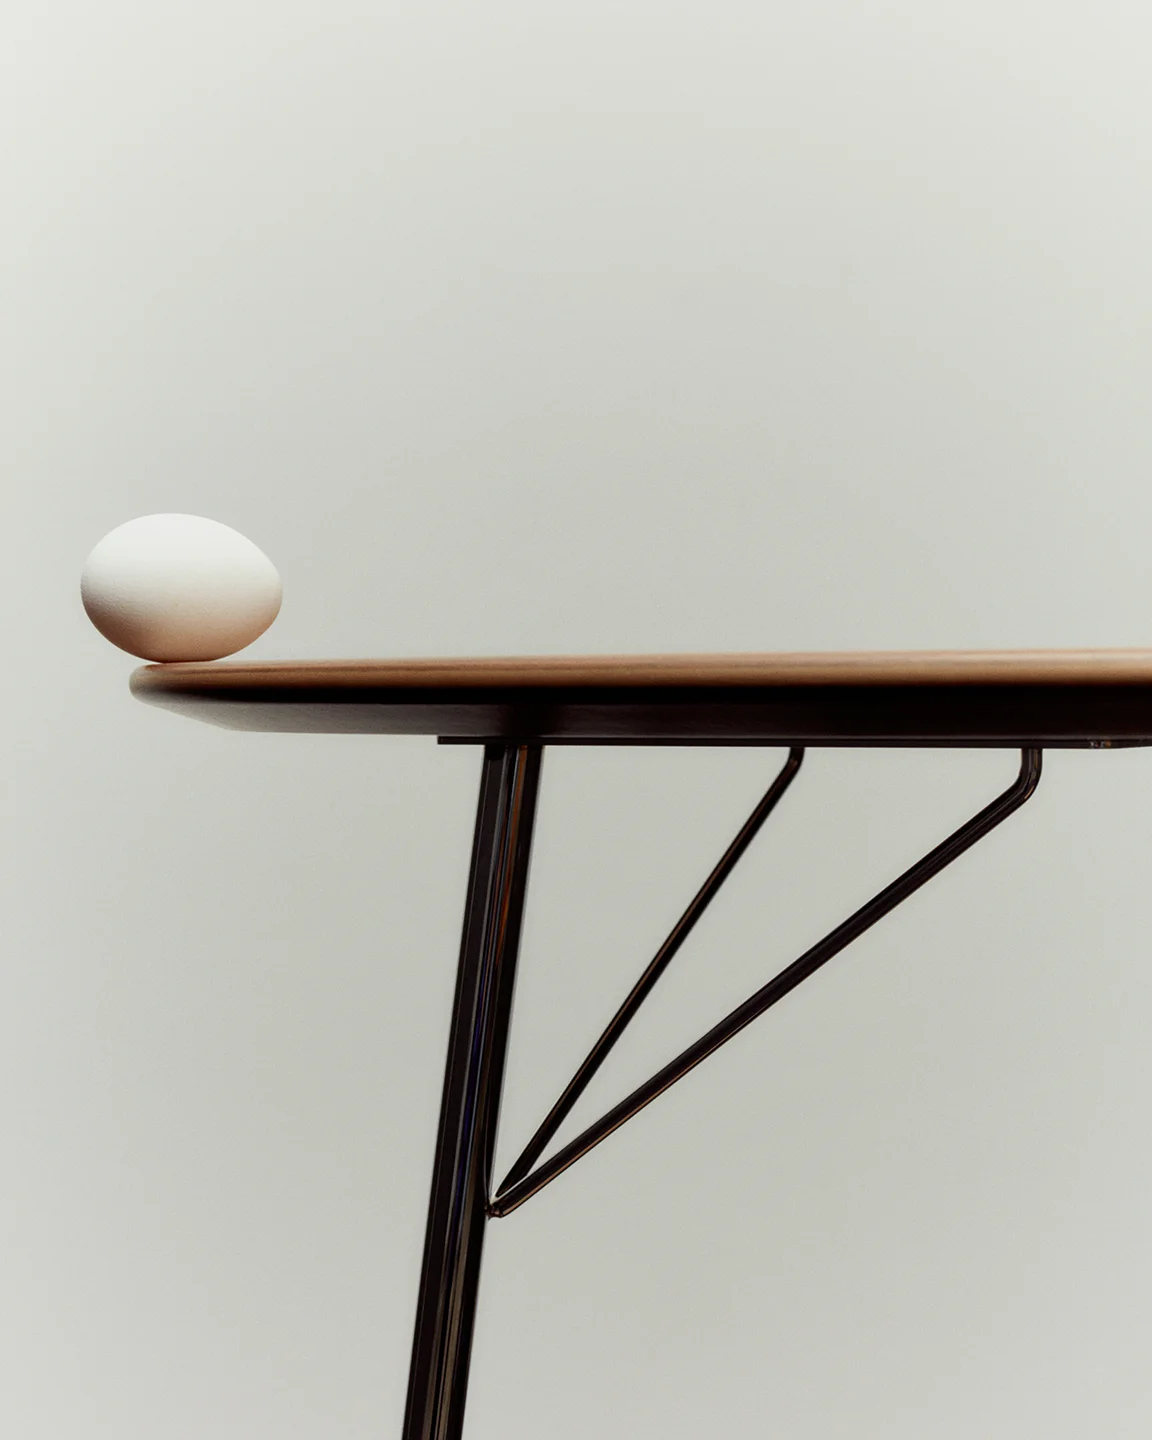 The Egg table relaunched - Arne Jacobsen